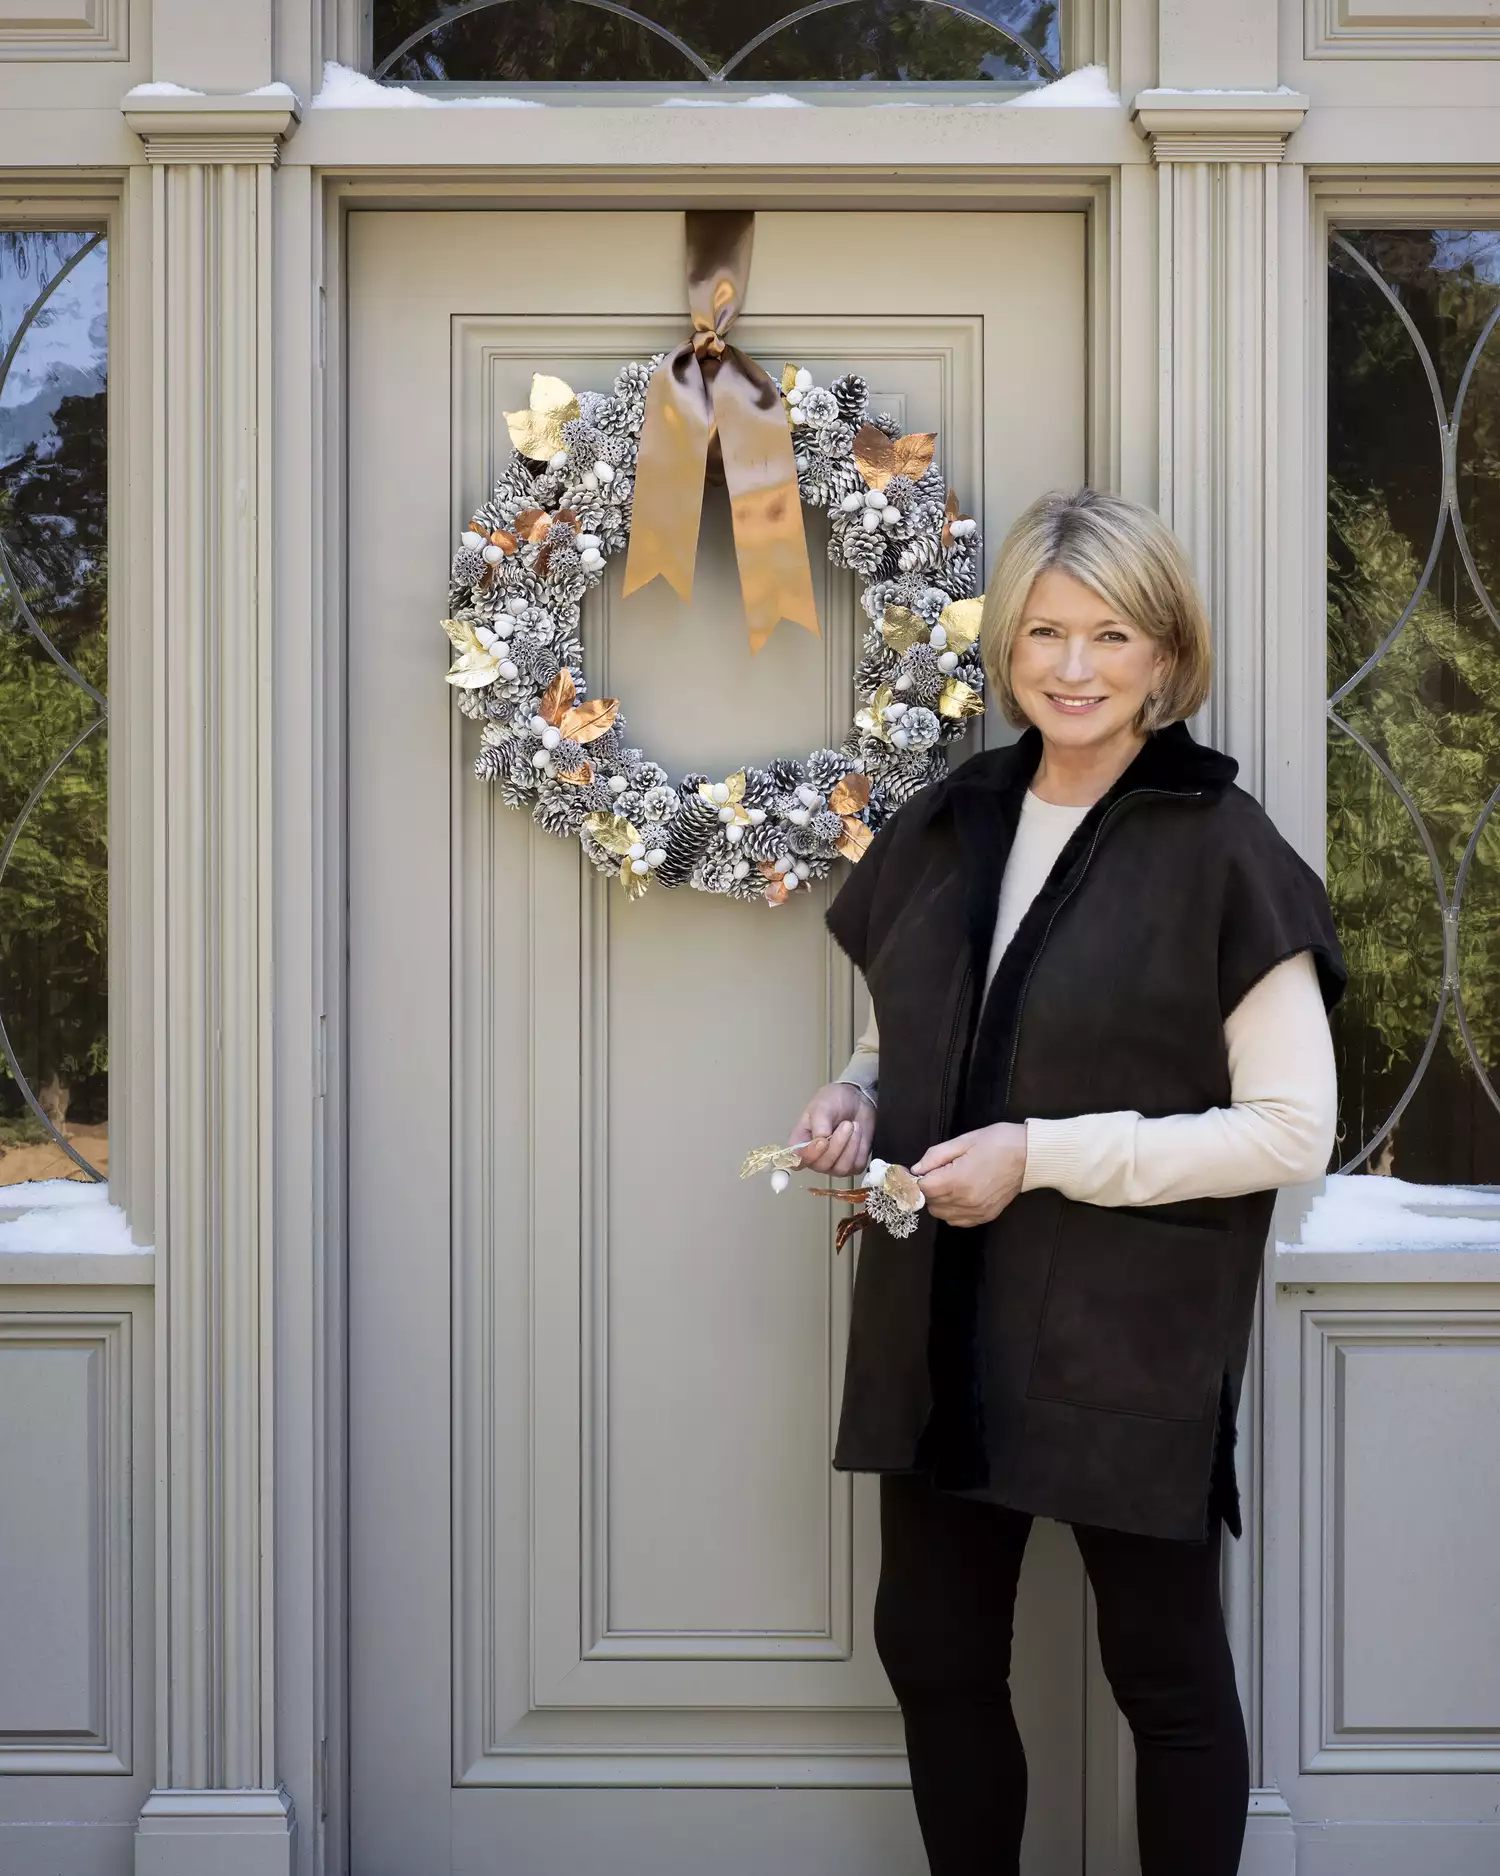 How to Hang a Wreath Without Making Holes in the Door